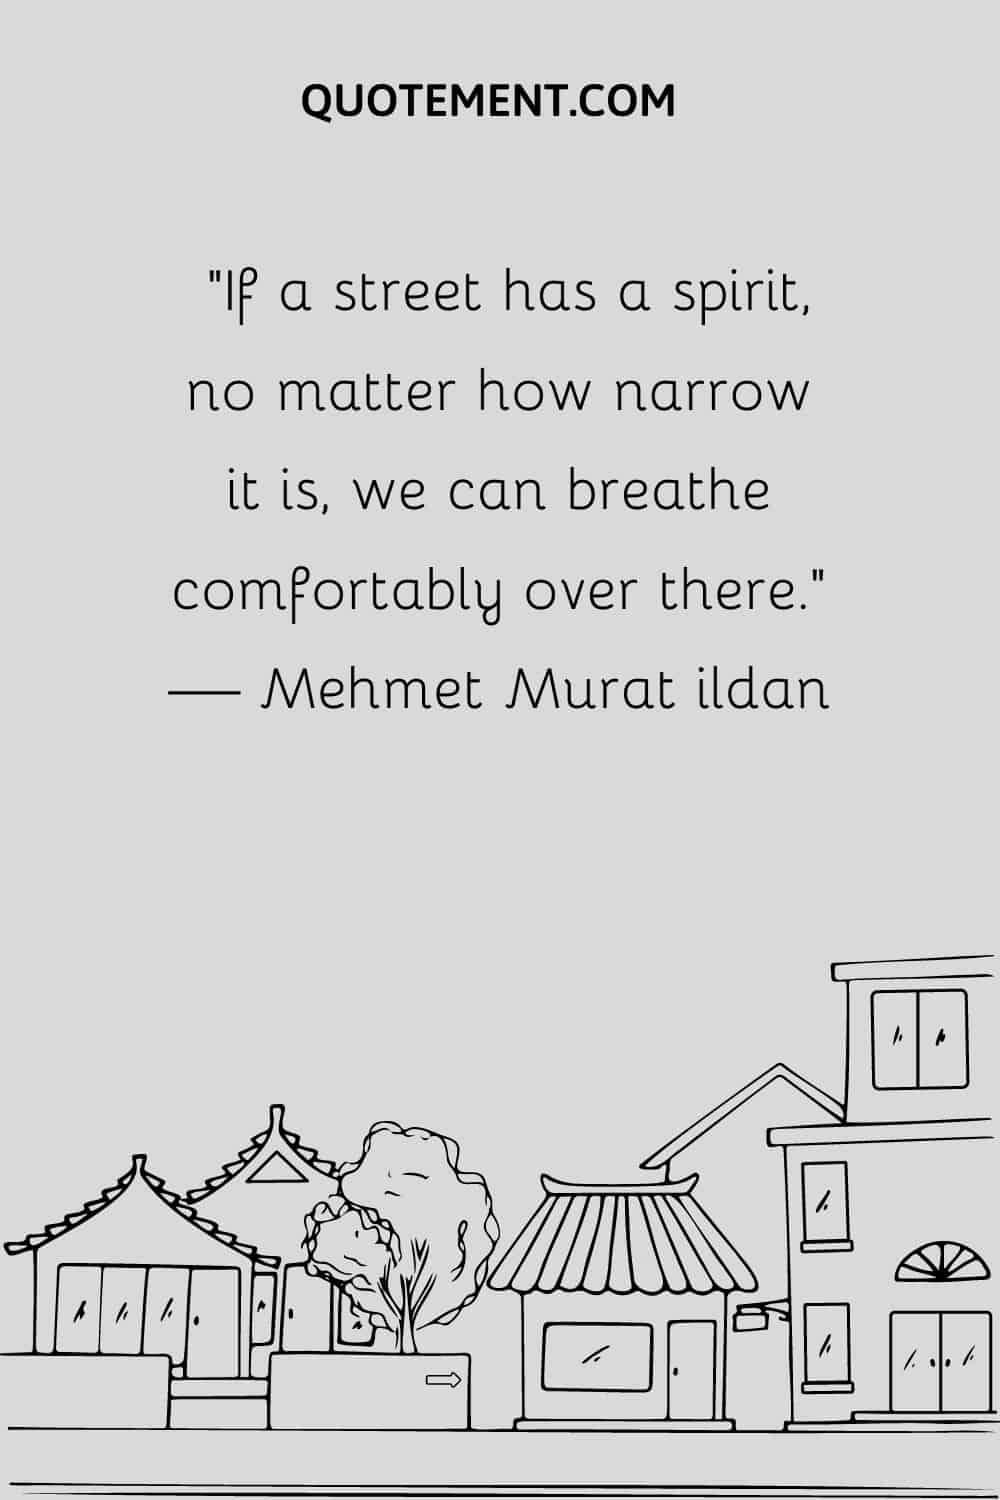 If a street has a spirit, no matter how narrow it is, we can breathe comfortably over there